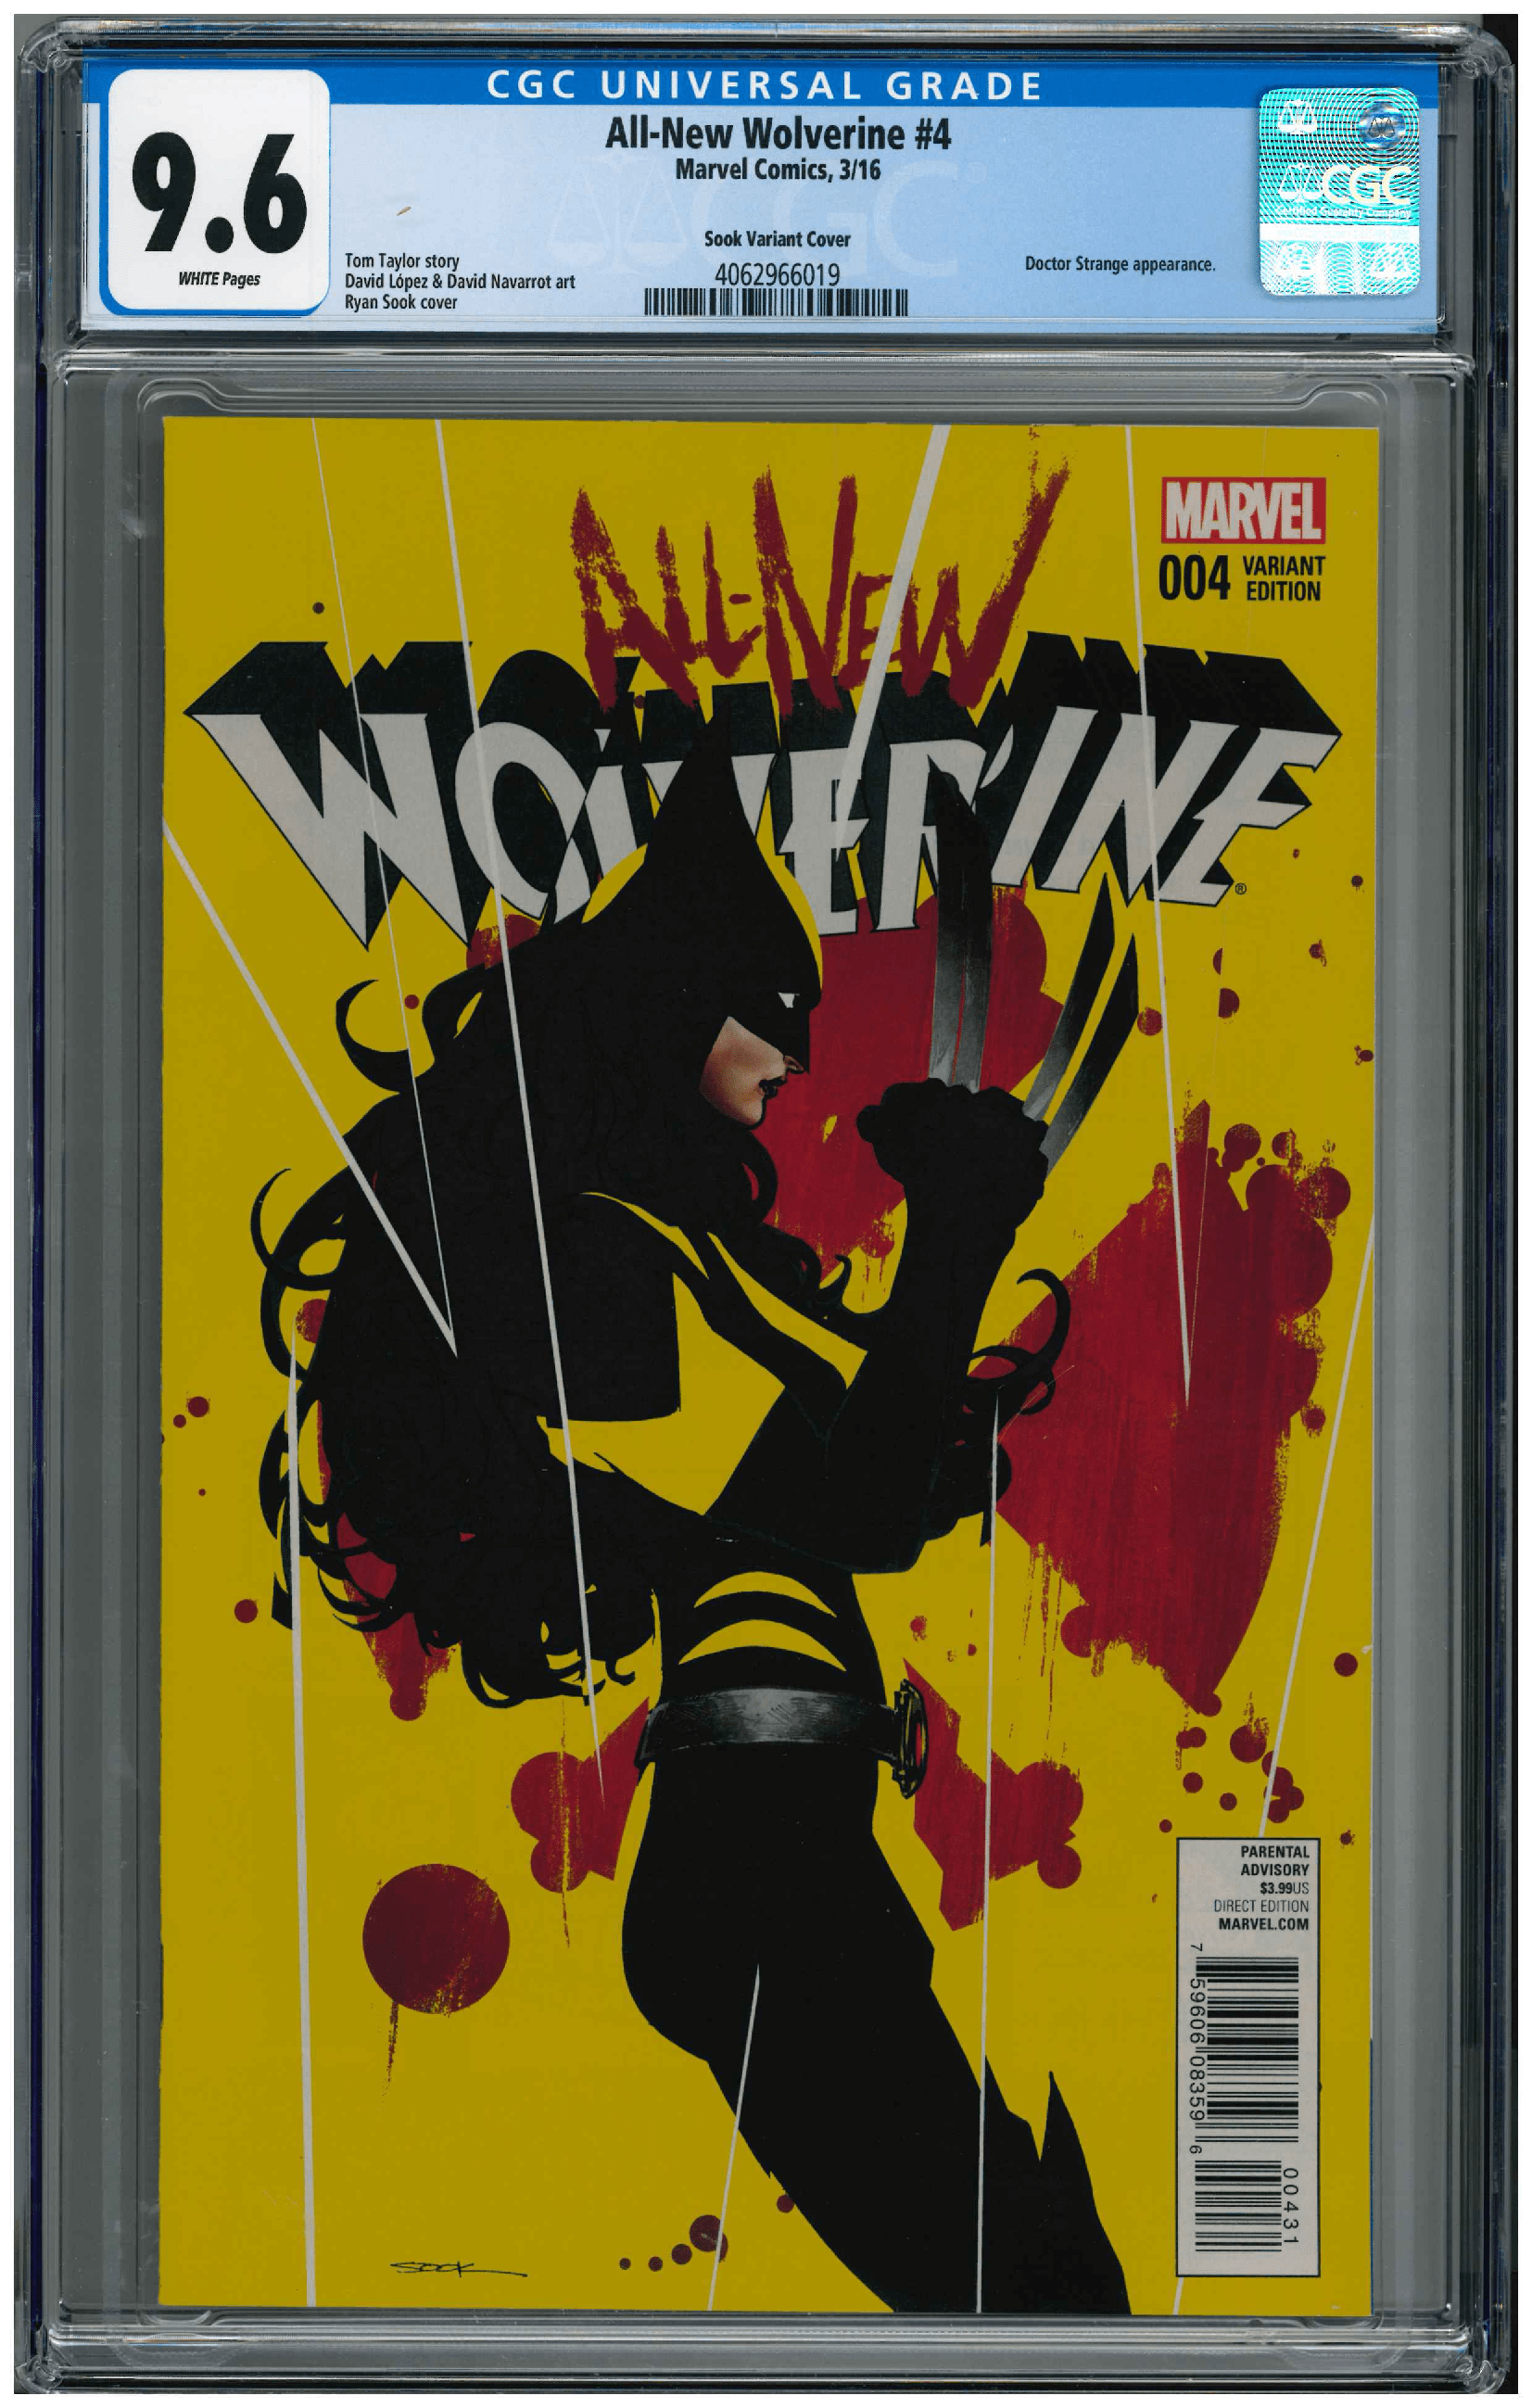 All-New Wolverine #4